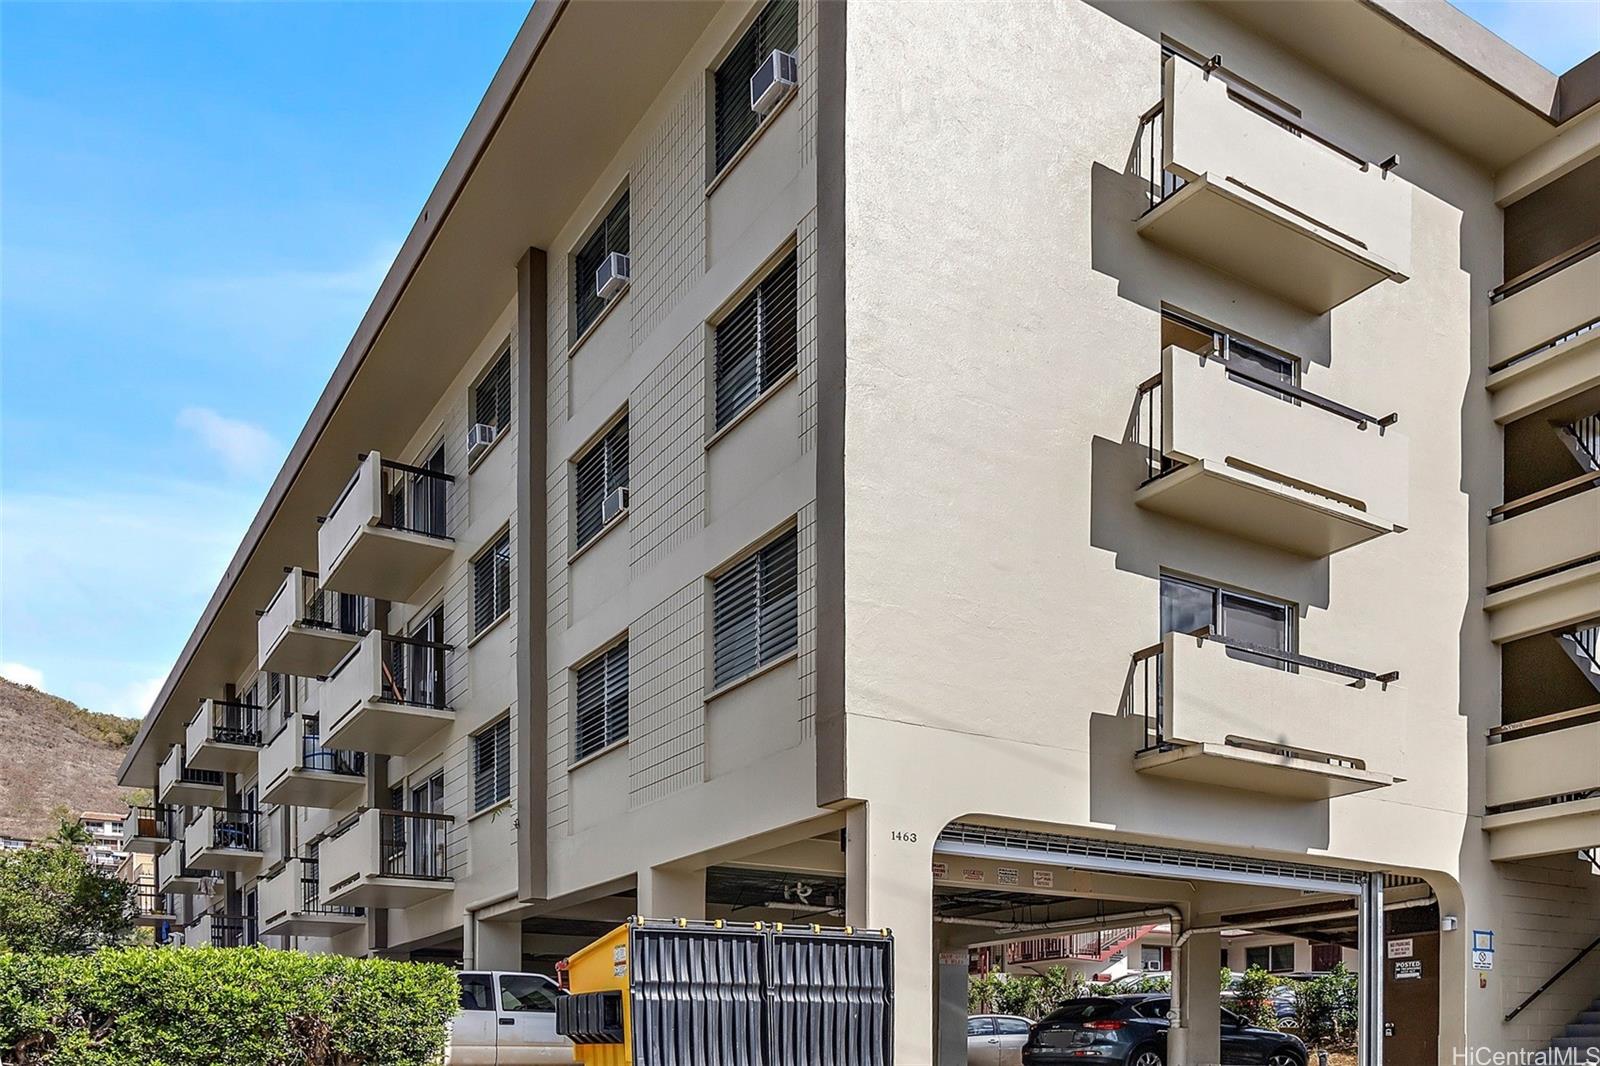 The Ko'ula condo architecture is different from other condos in Ward  Village